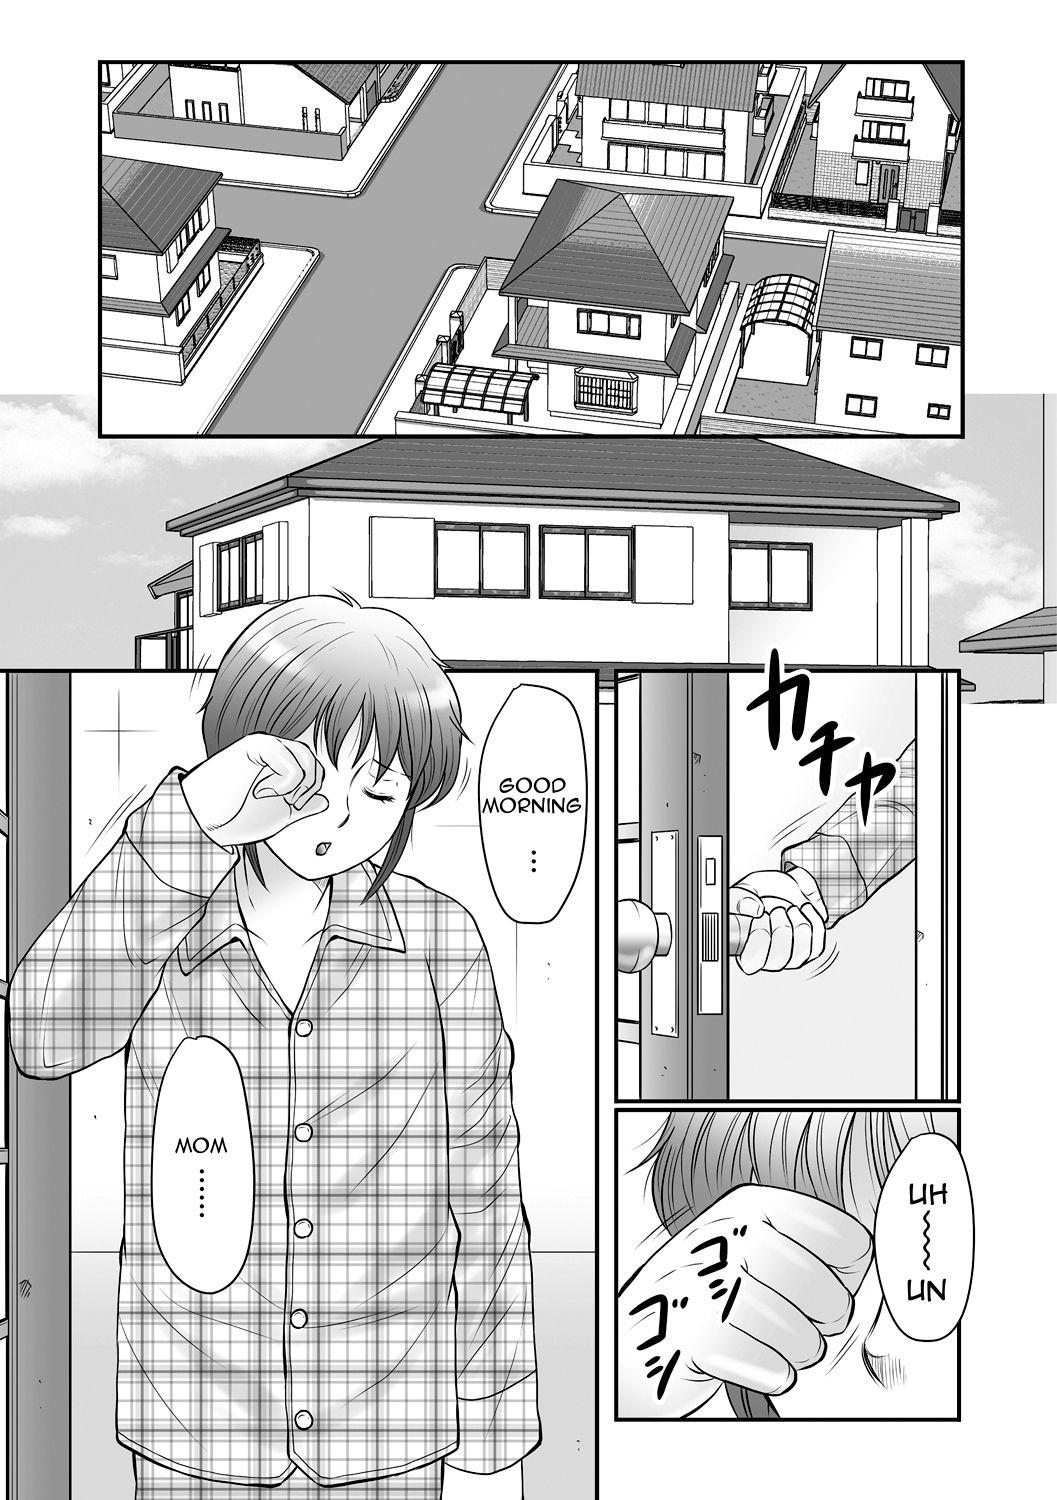 Her Boshi no Susume - The advice of the mother and child Ch. 1 Freckles - Page 3